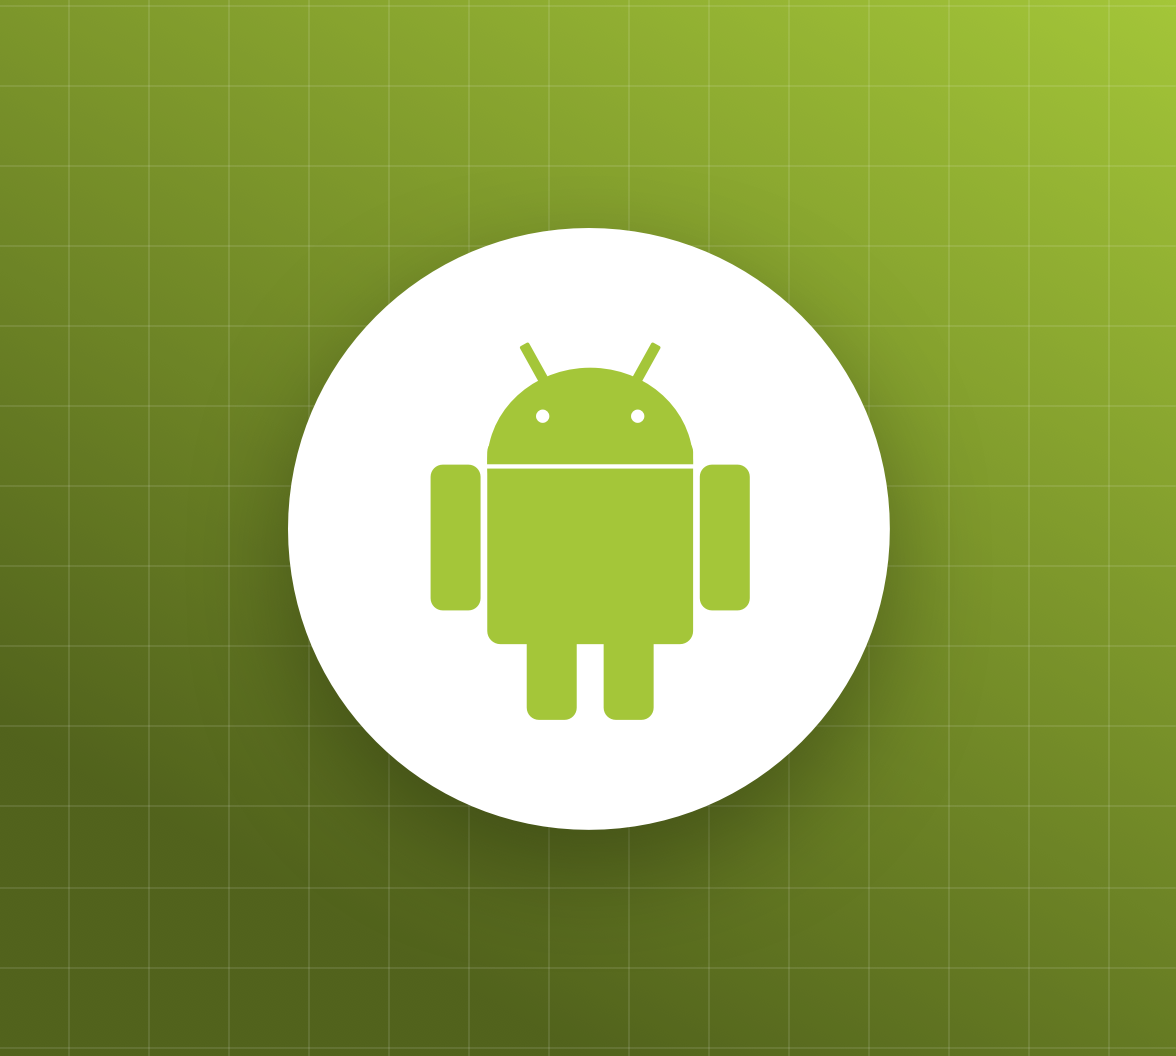 Background Processing in Android